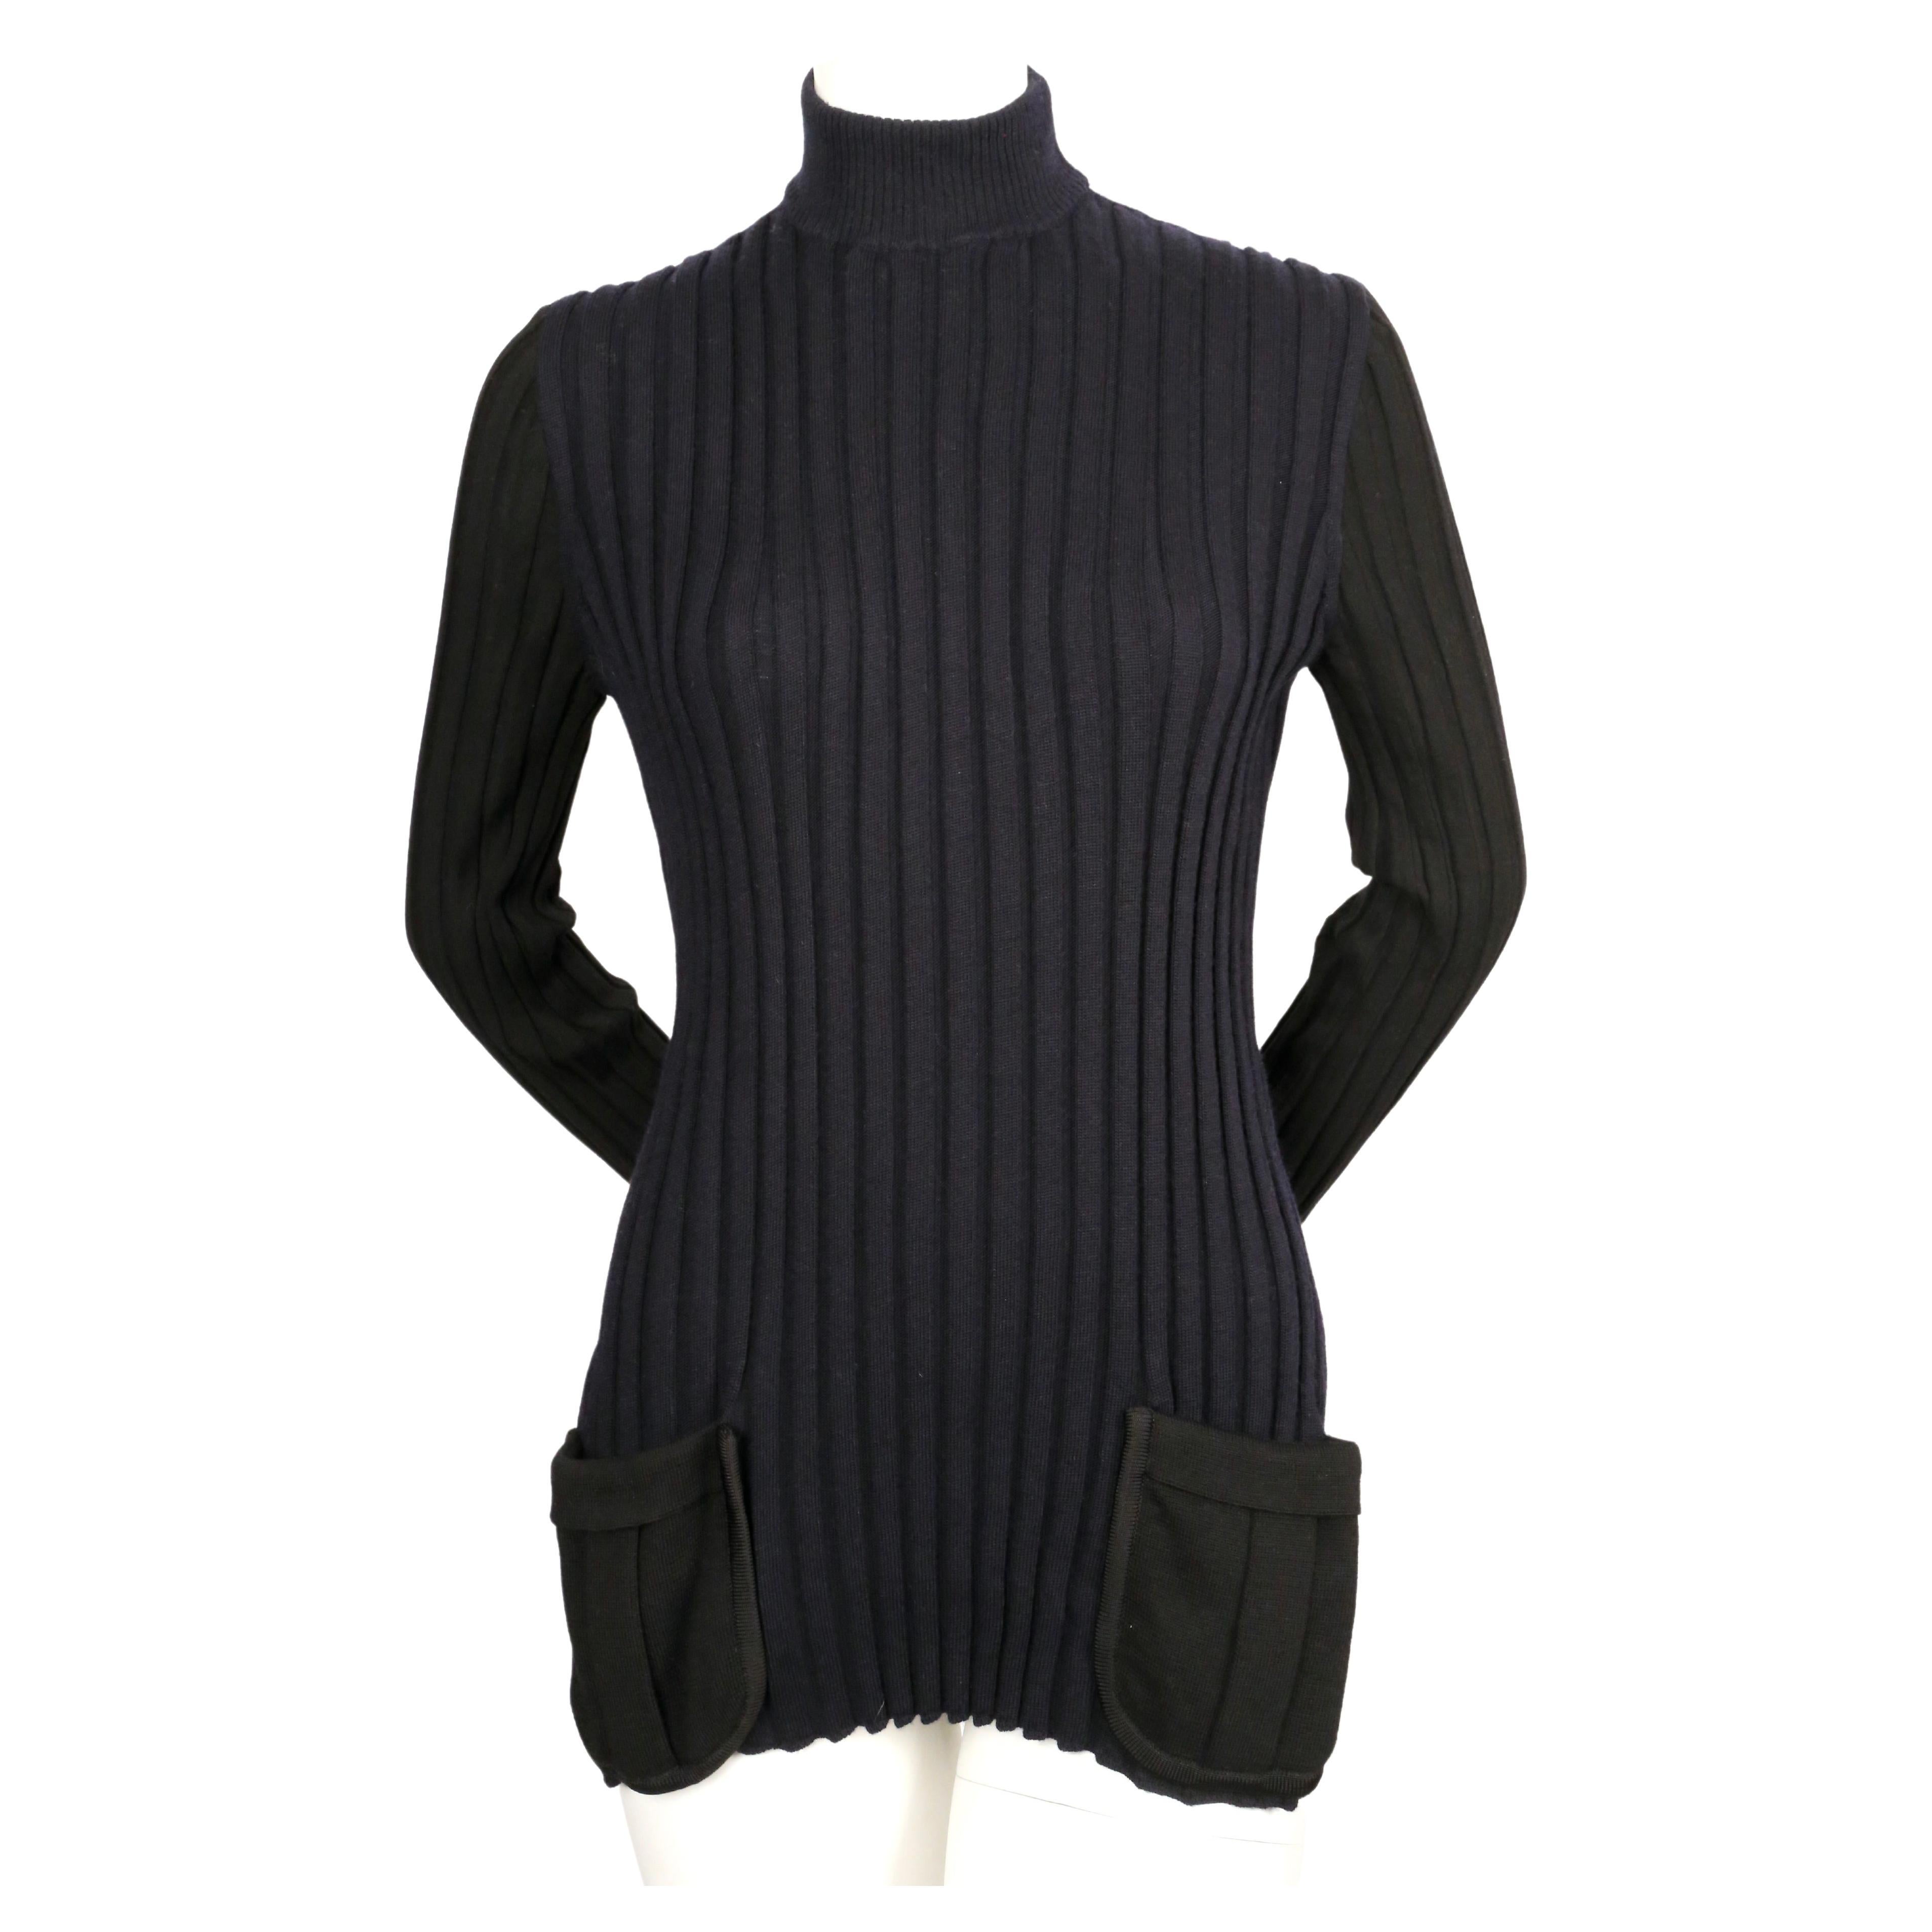 Navy blue and black tunic with slits and contrasting patch pockets designed by Phoebe Philo for Celine dating to fall of 2015. Similar sweater seen on the runway. French size M. Approximate measurements (unstretched):  shoulder 10